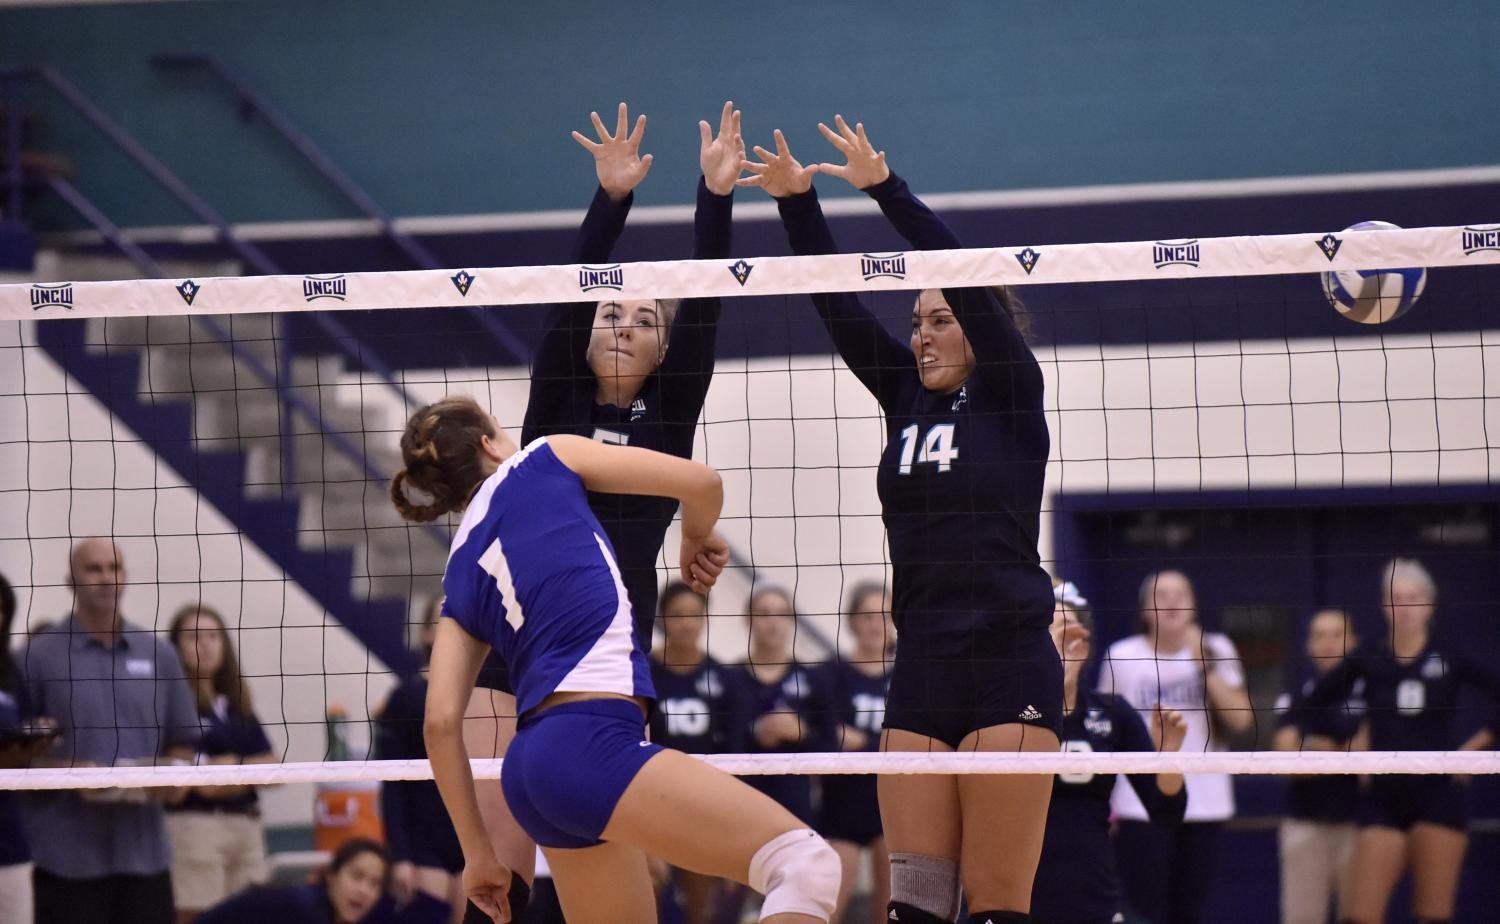 Madison Peters, left, and Sydney Brock, right, block a spike attempt from a Barton player in UNCWs exhibition game vs. Barton College on Aug. 20.